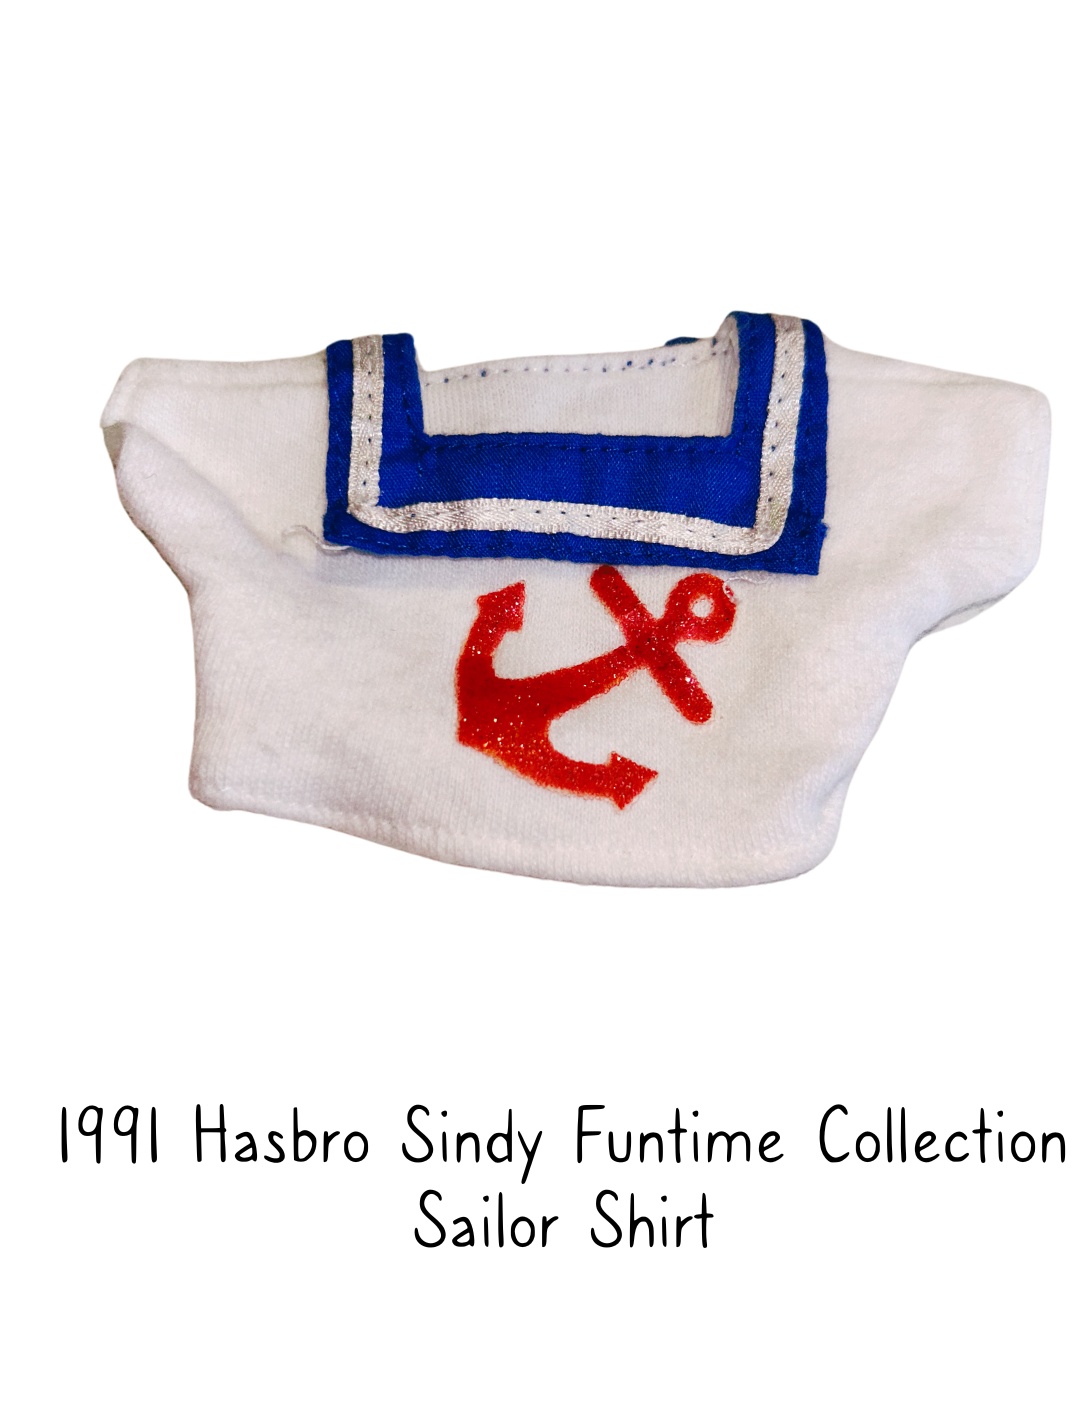 1991 Hasbro Sindy Fashion Doll Funtime Collection Sailor T-Shirt